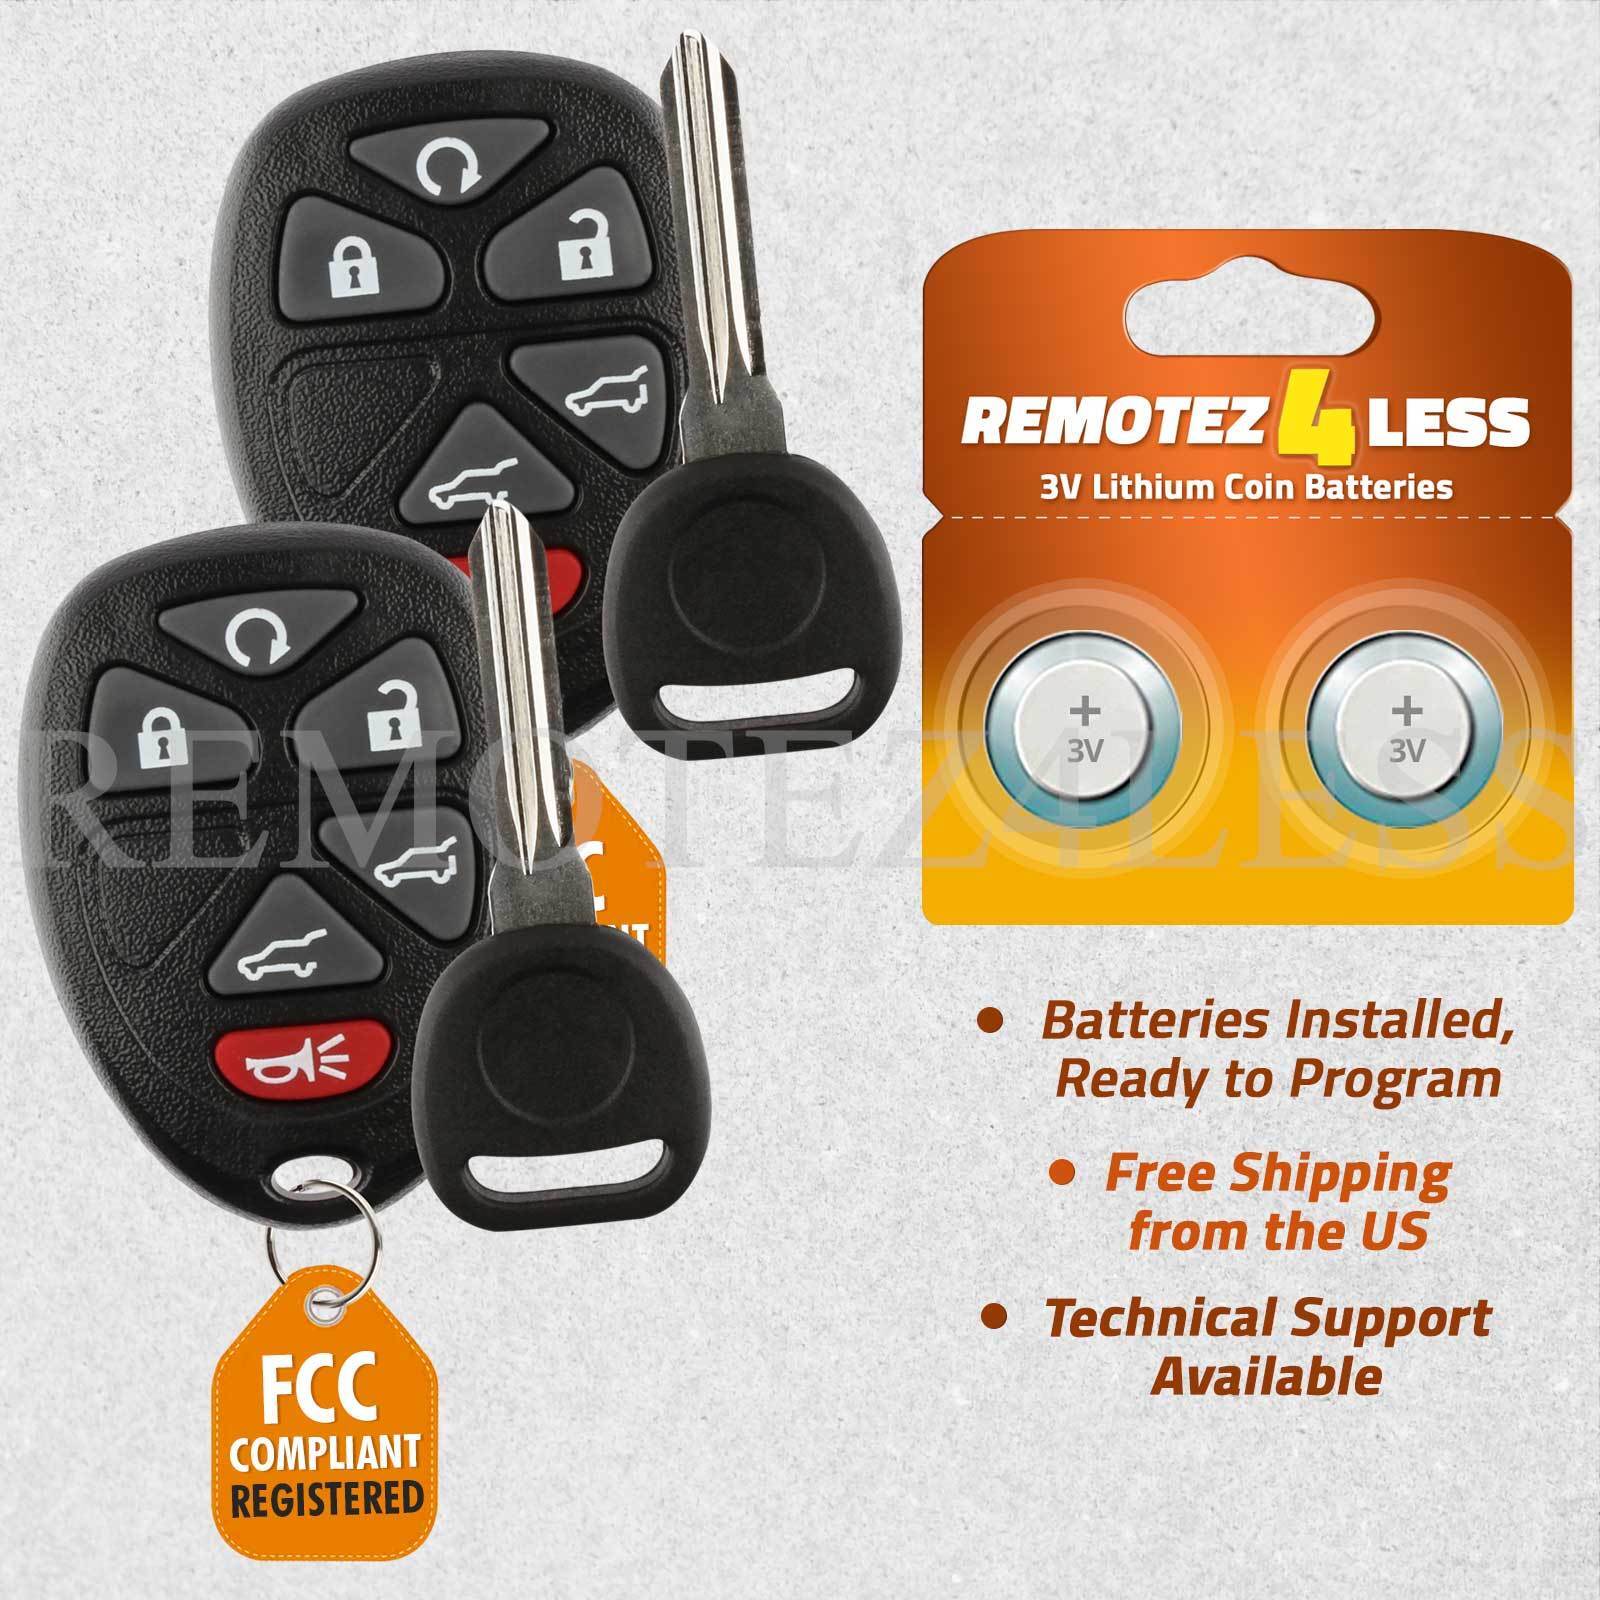 2 New Replacement Keyless Remote Car Fob for 15913427 + Circle Plus Keys n Clips